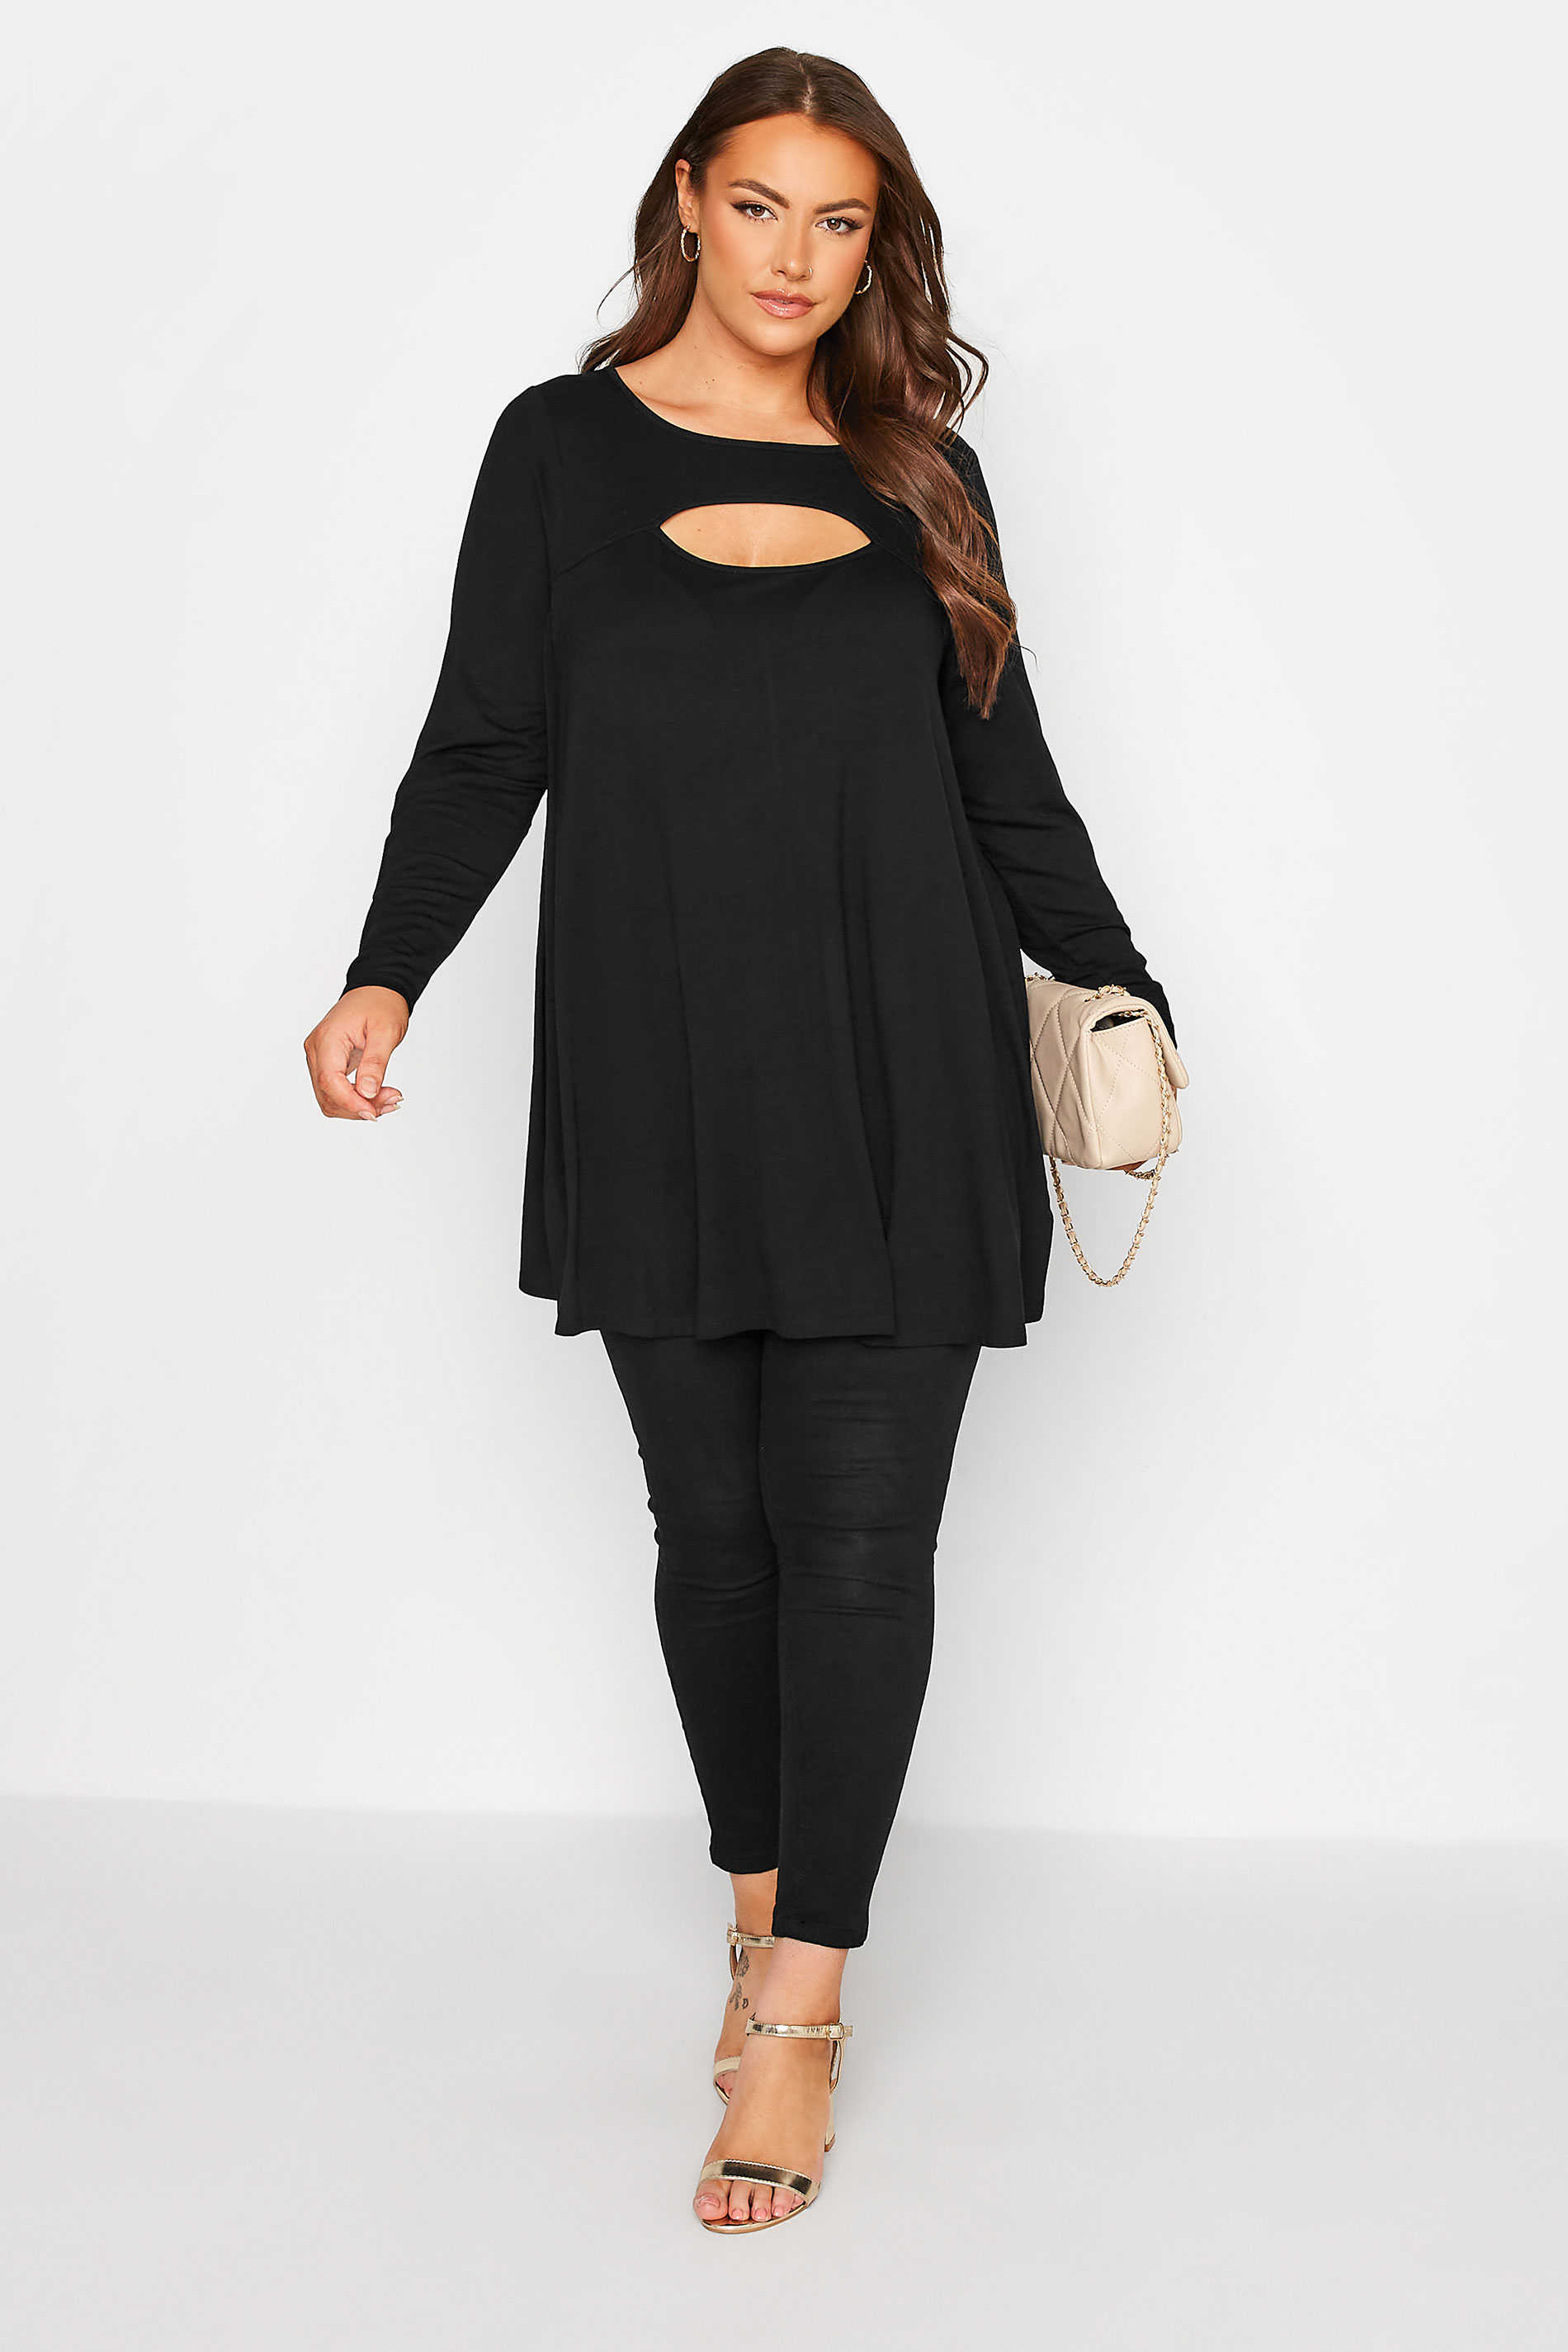 Plus Size Black Cut Out Swing Top | Yours Clothing 2